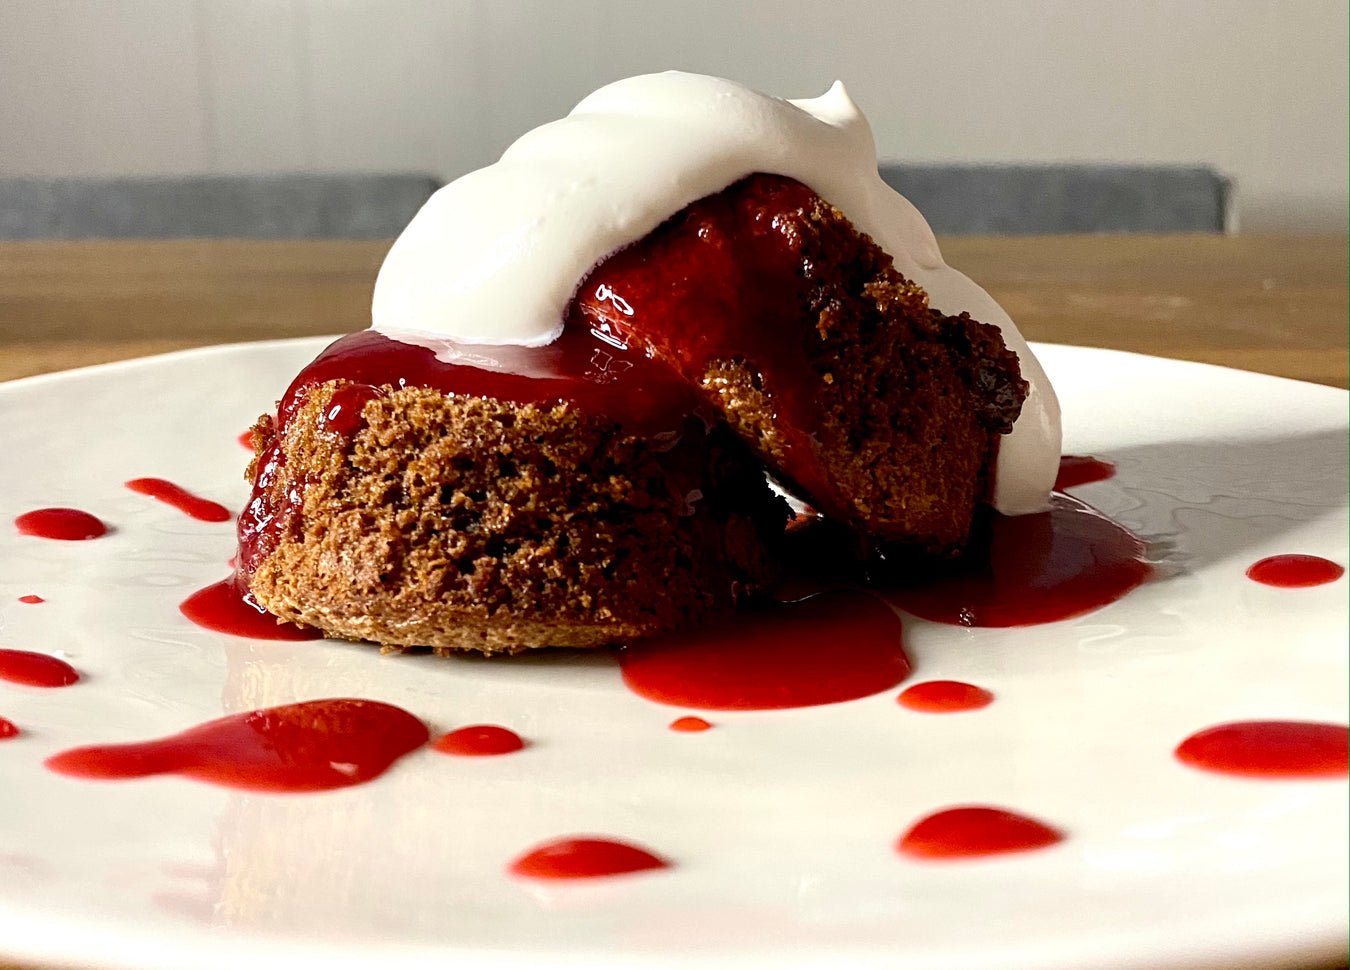 Chef Jessica's Molten Chocolate Lava Cakes with Raspberry Coulis